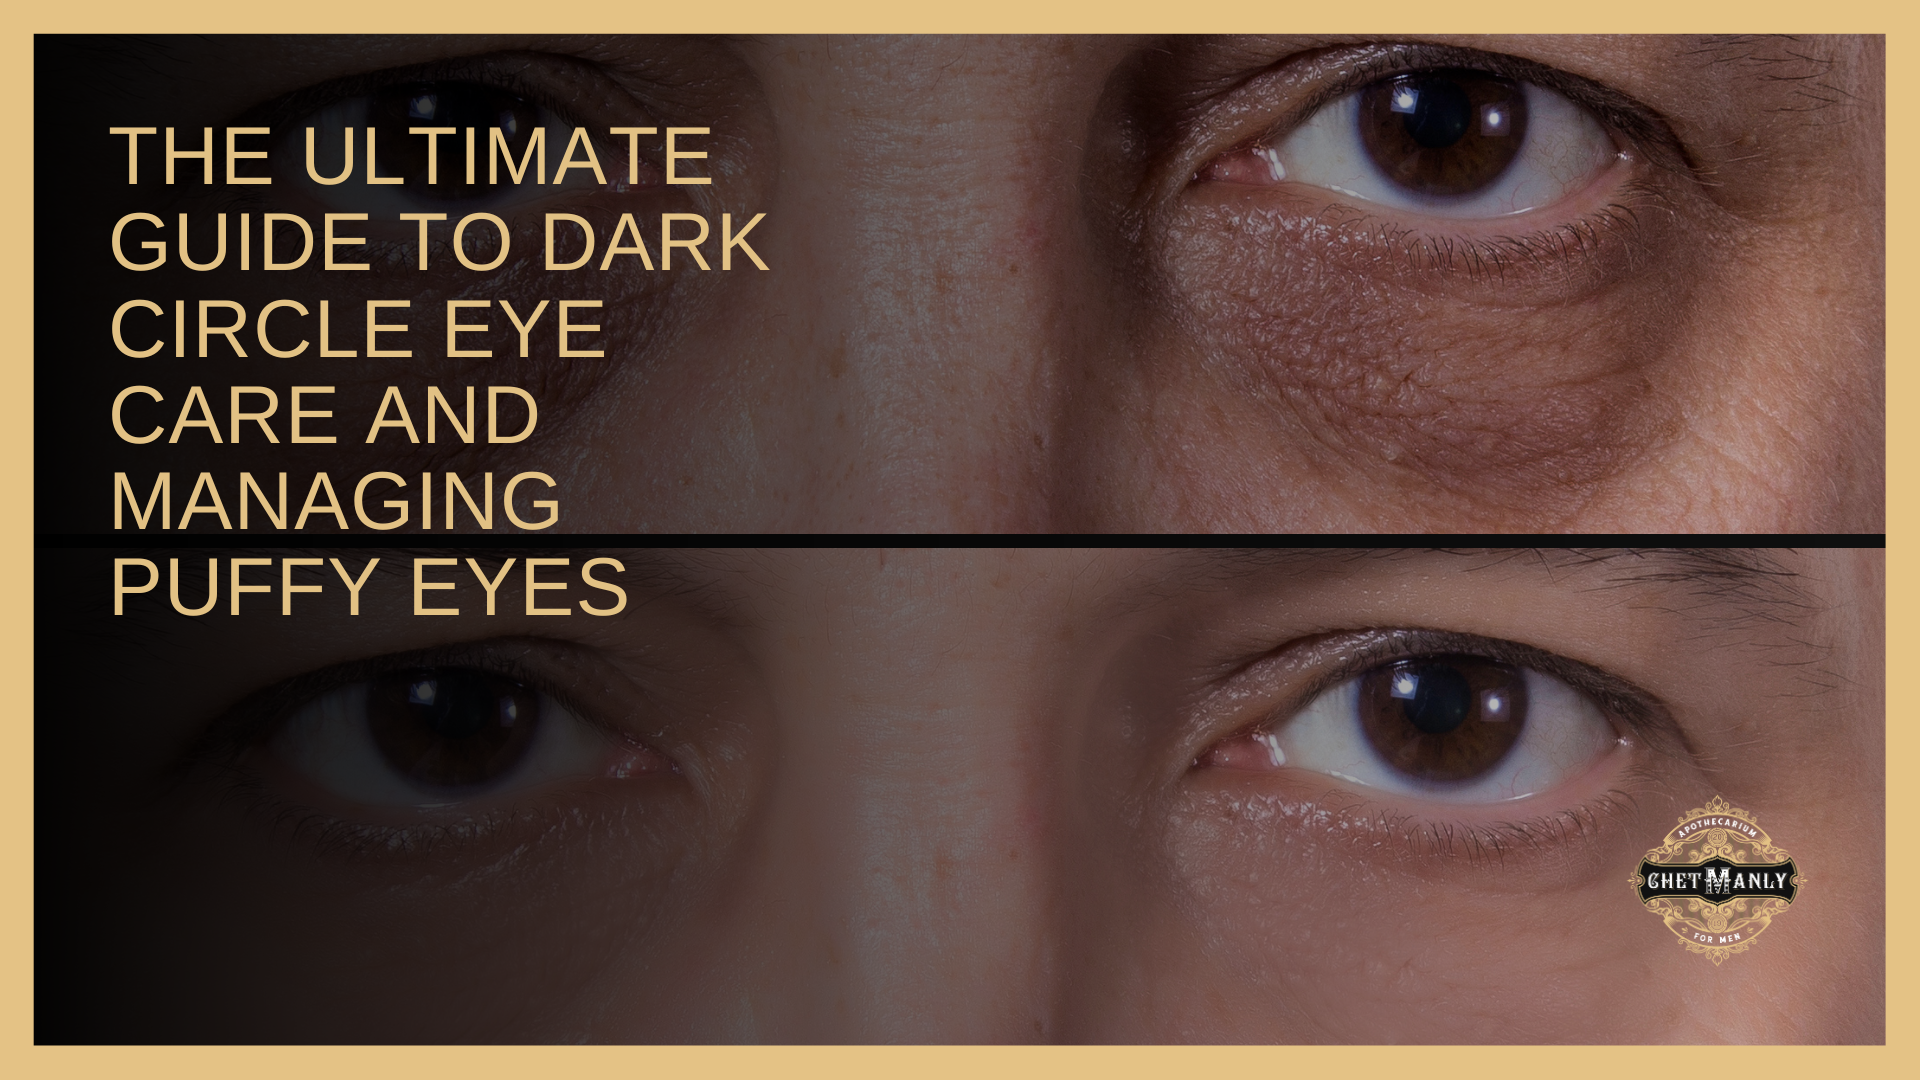 The Ultimate Guide to Dark Circle Eye Care and Managing Puffy Eyes